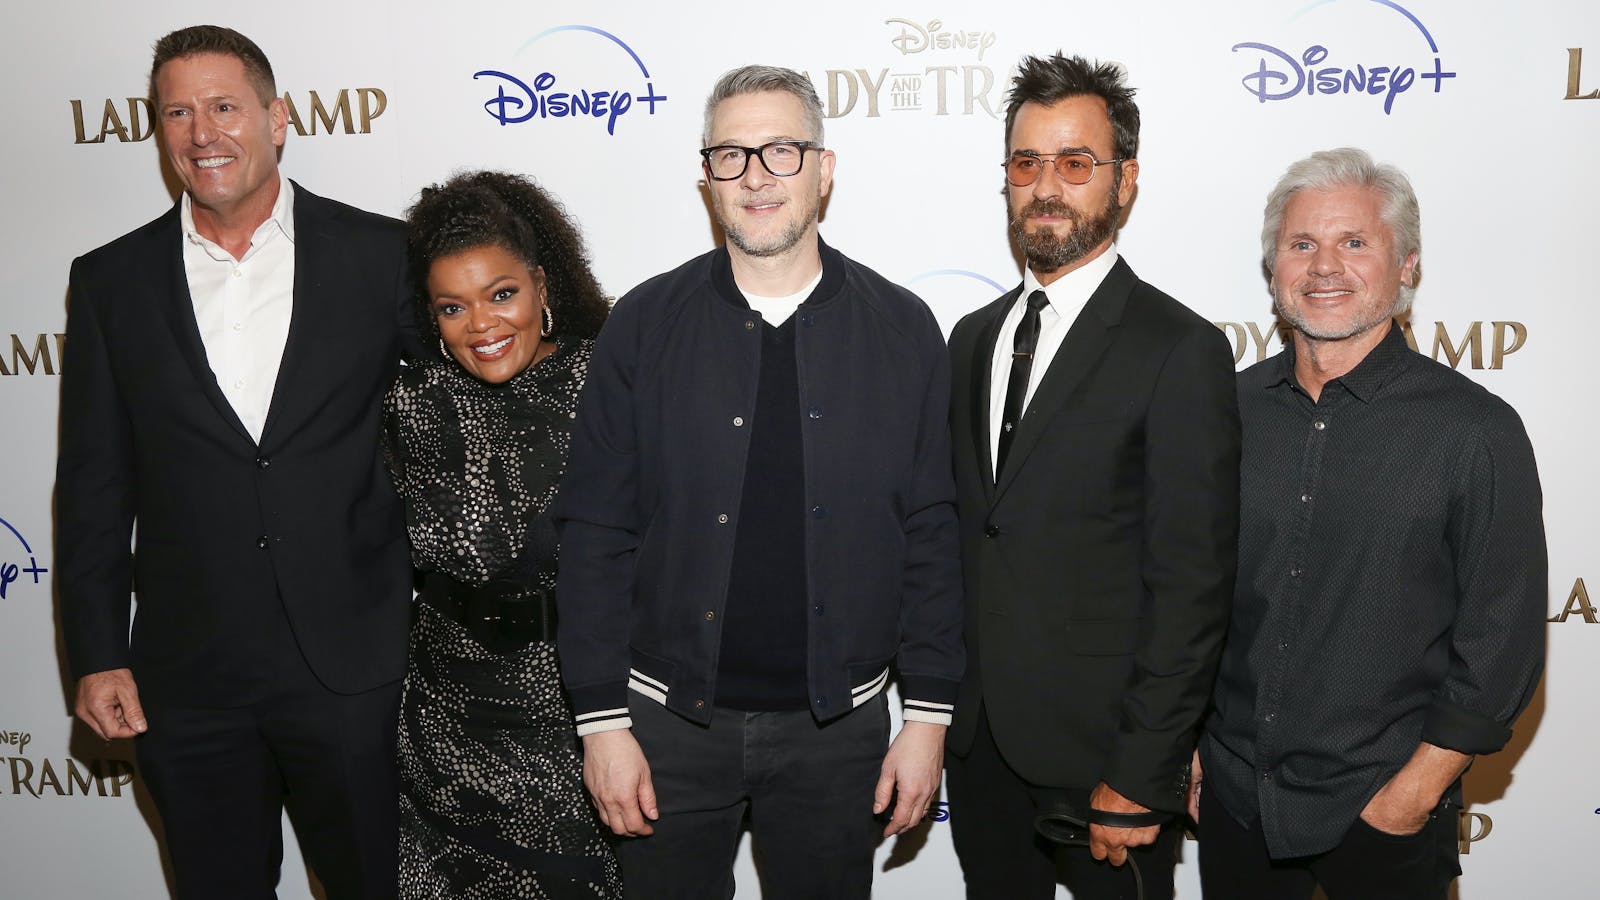 Disney's direct to consumer chief Kevin Mayer, far left, with the cast of Disney's 'Lady and the Tramp' at a screening sponsored by Disney Plus. Photo by AP